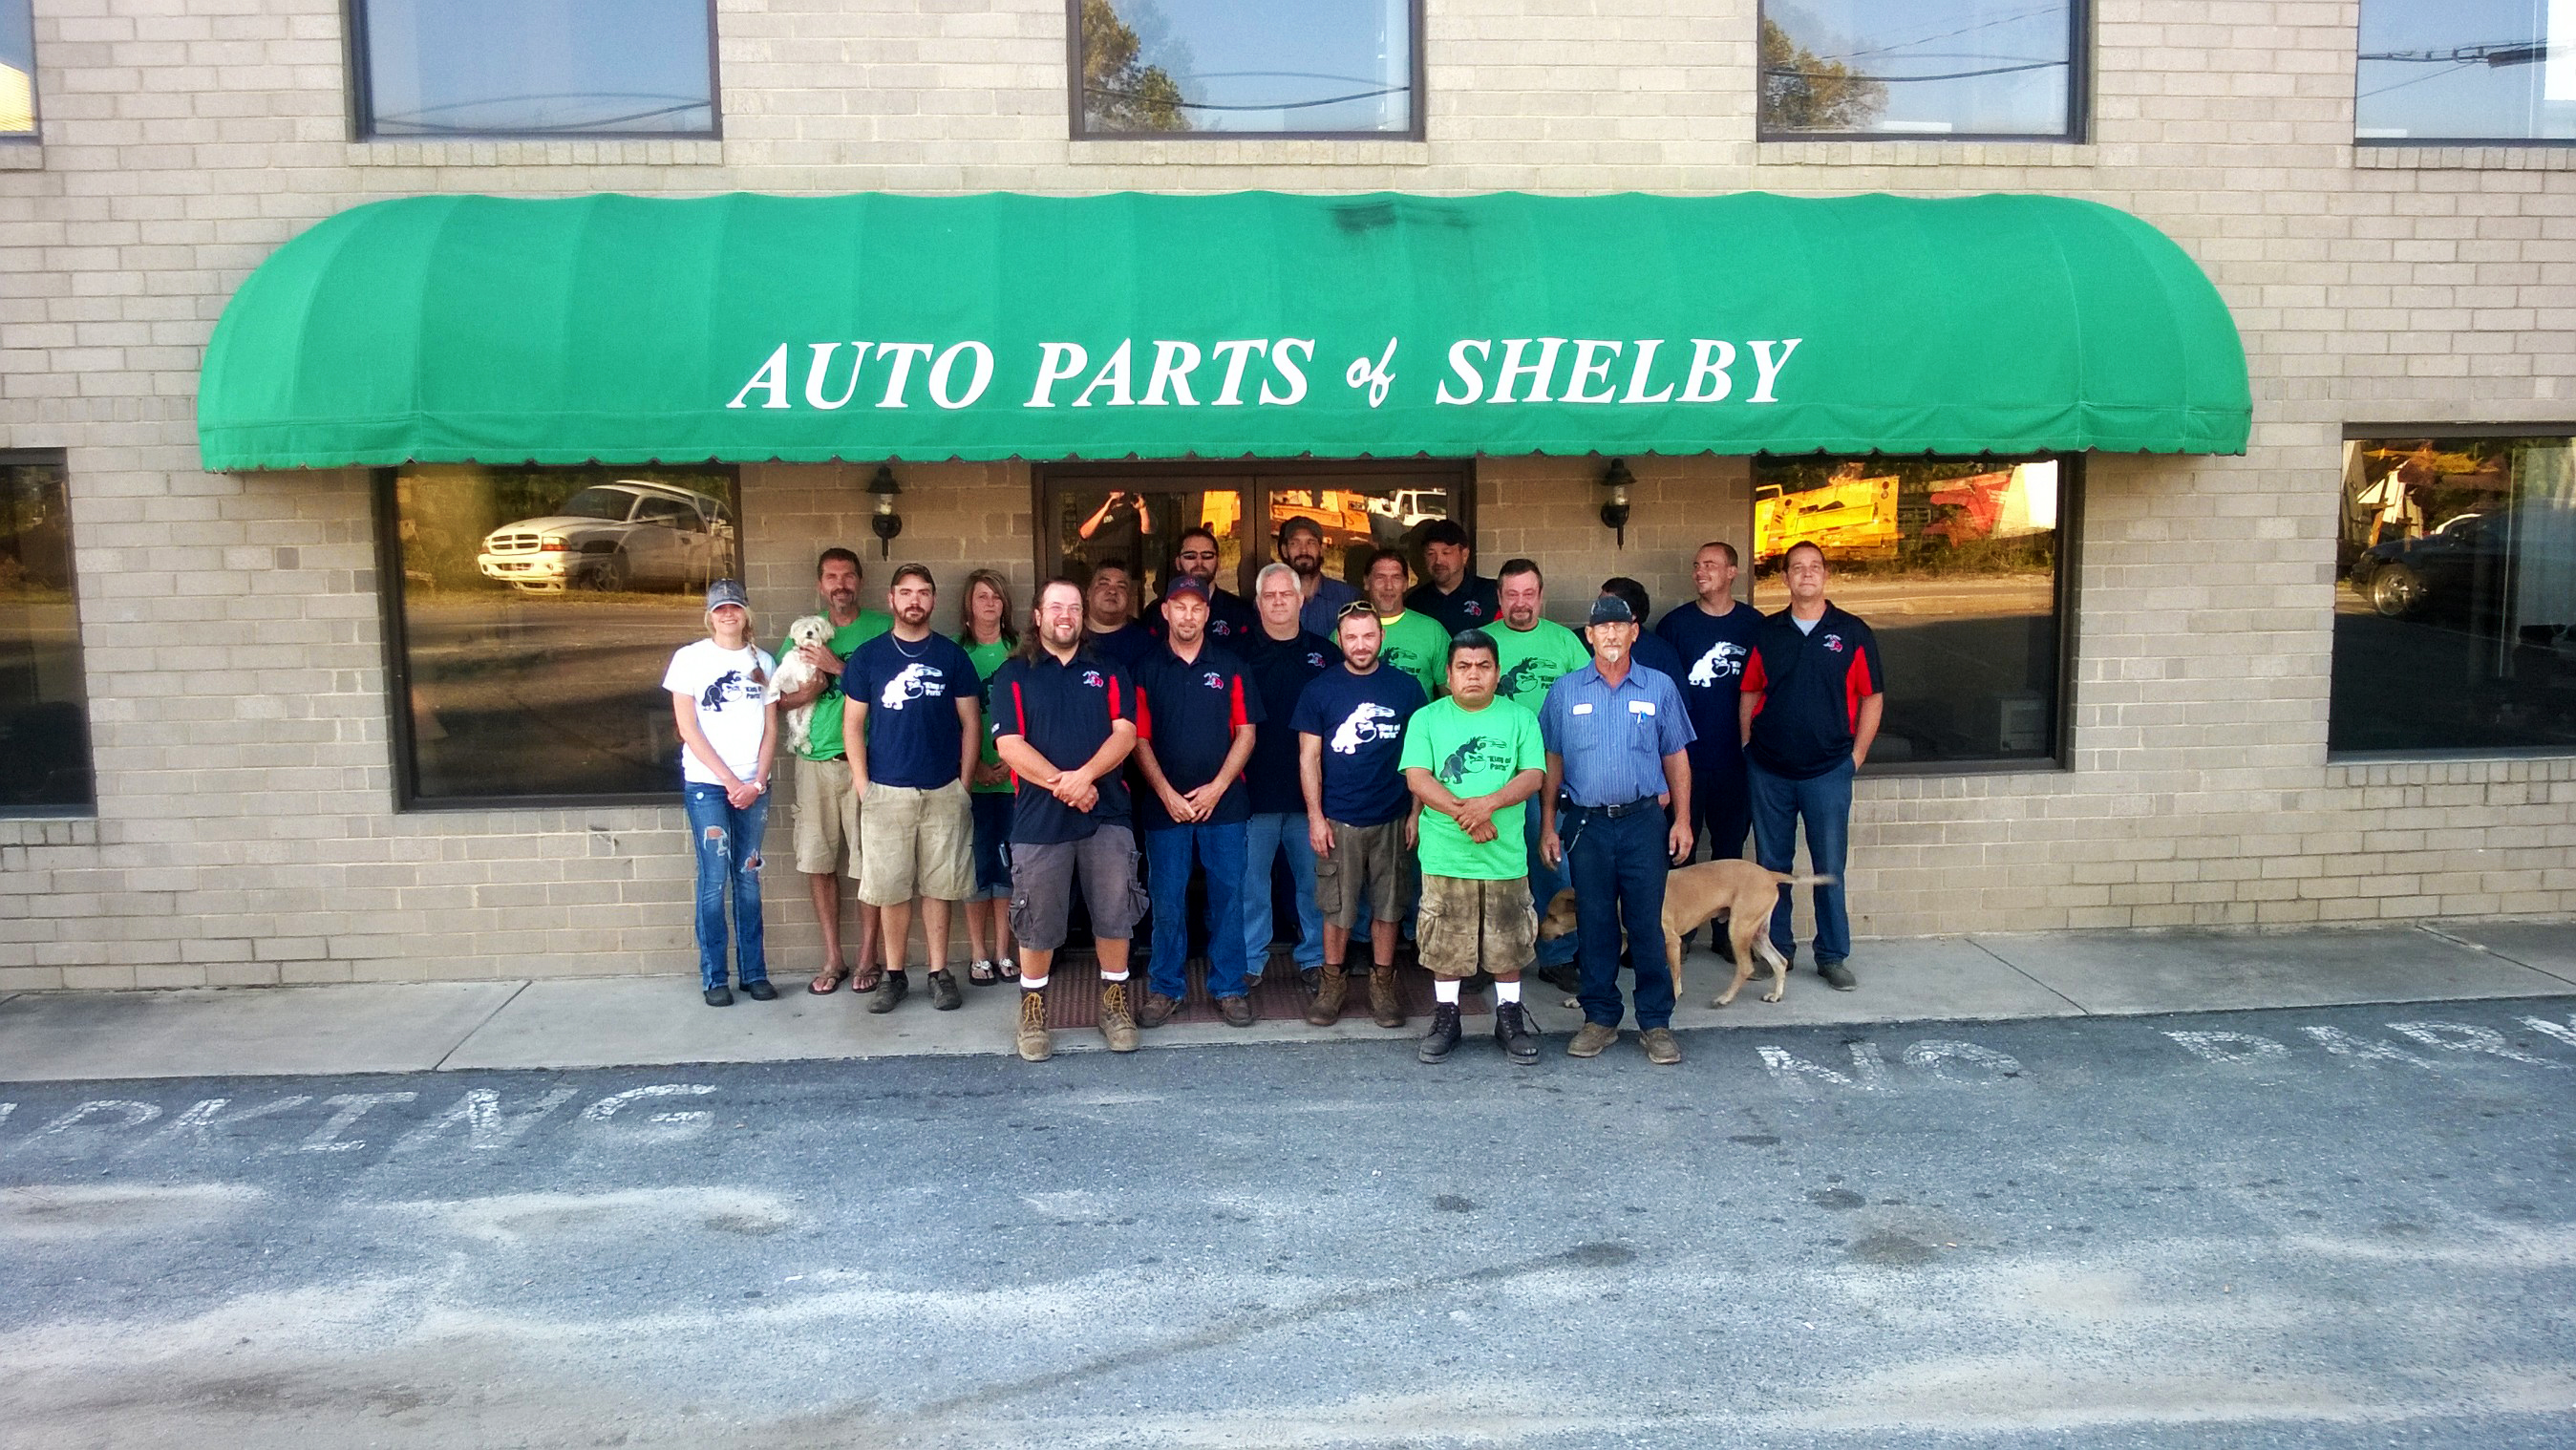 Auto Parts of Shelby crew including Molly and Butter